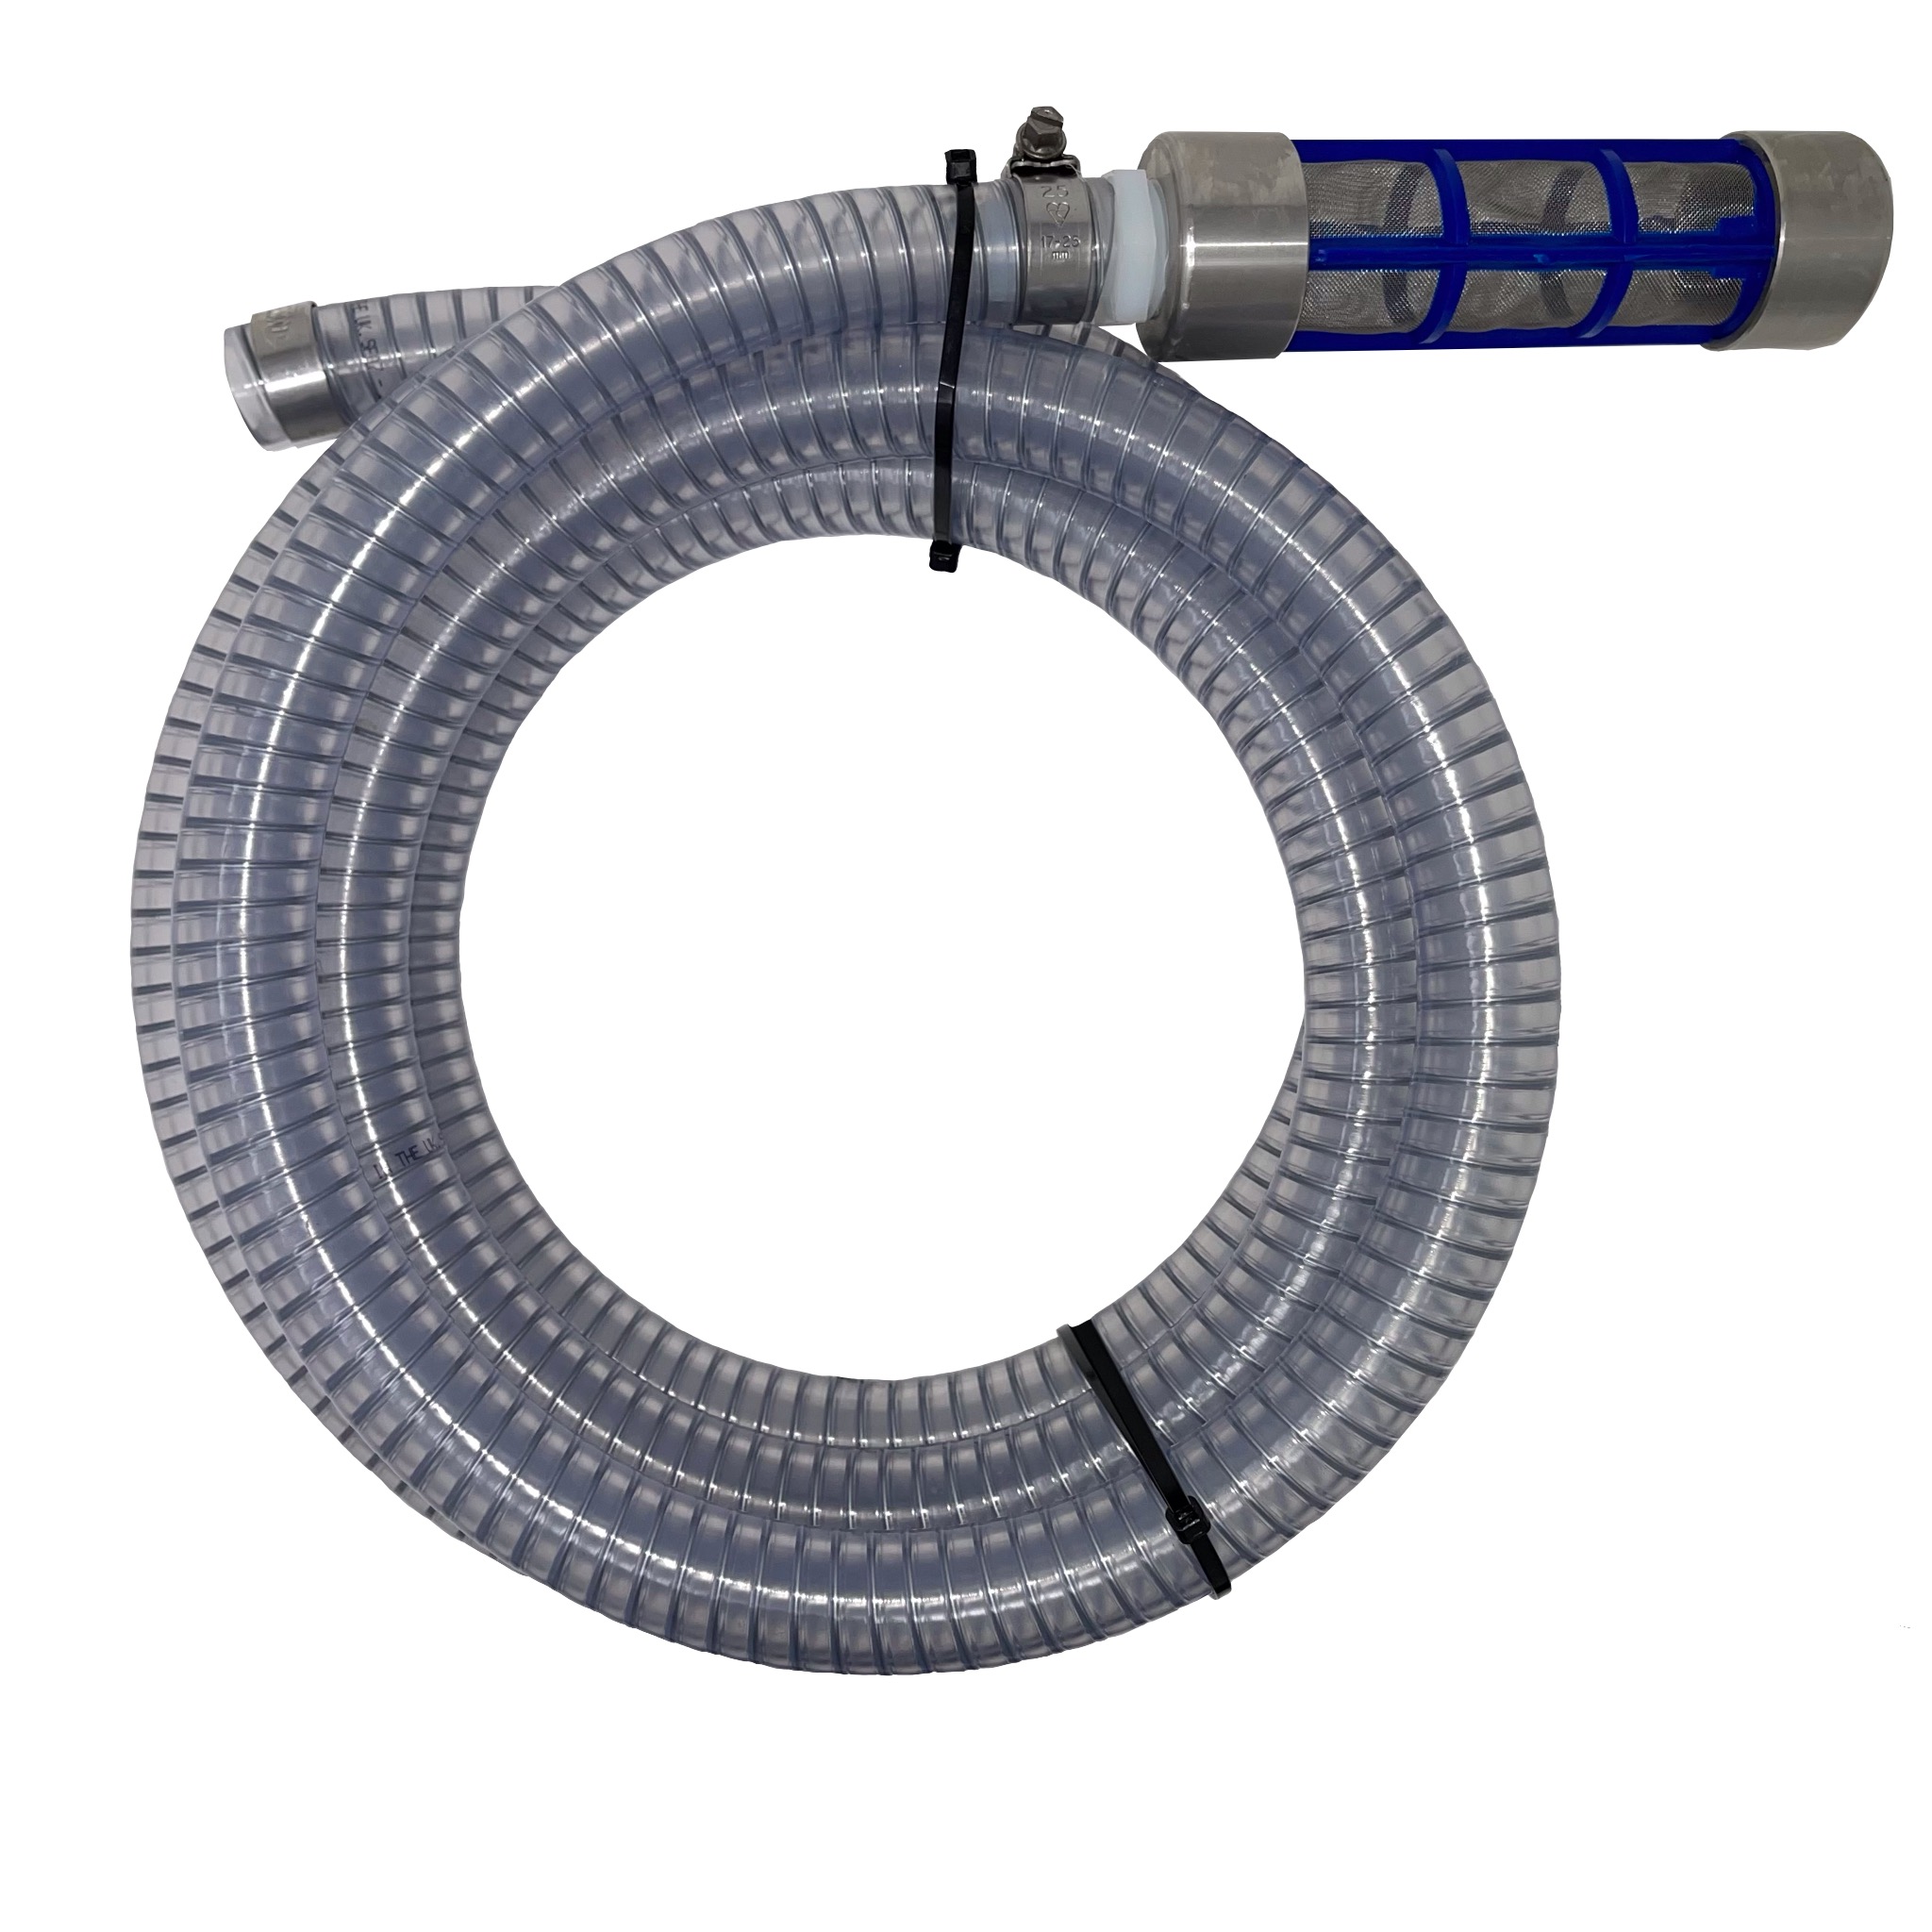 Pressure Washer Suction Hose Kit for 3/4 Barb